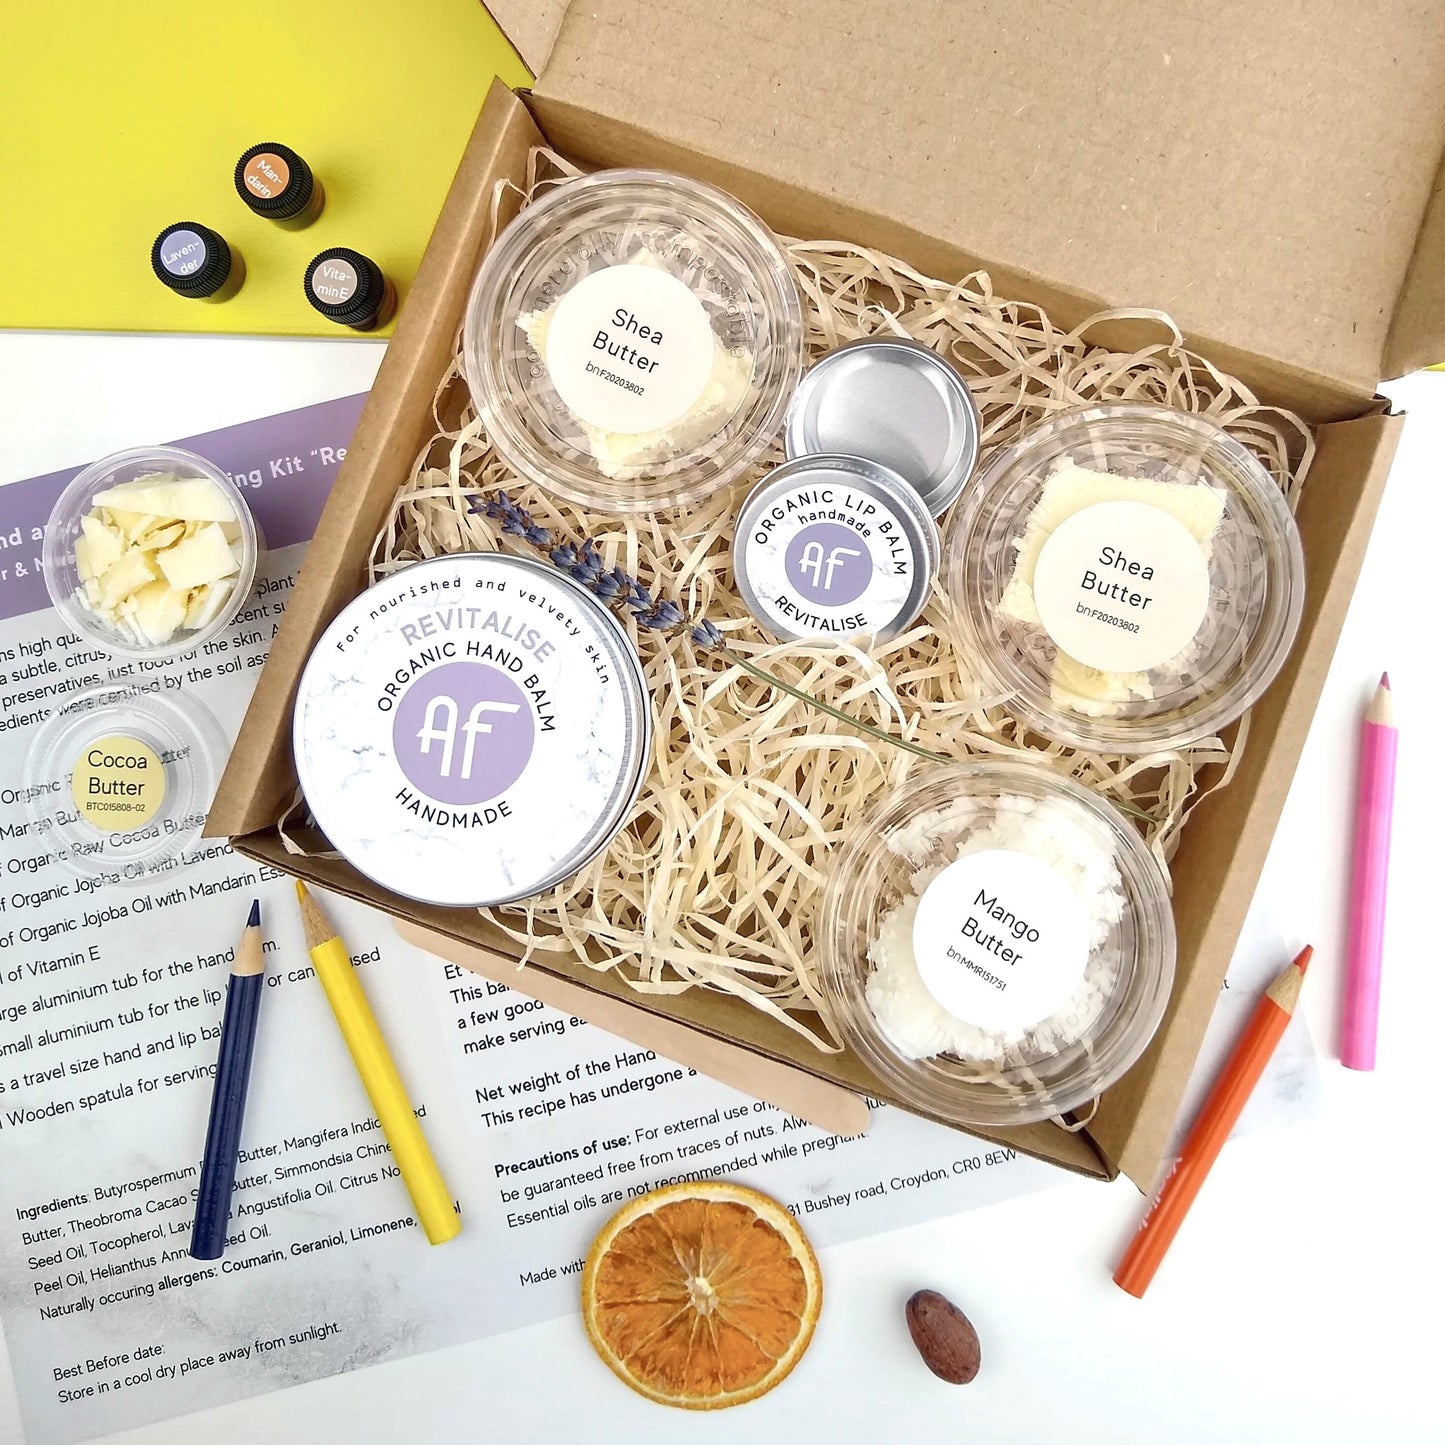 Personalised 'Thank you Teacher' Hand and Lip Balm Making kit